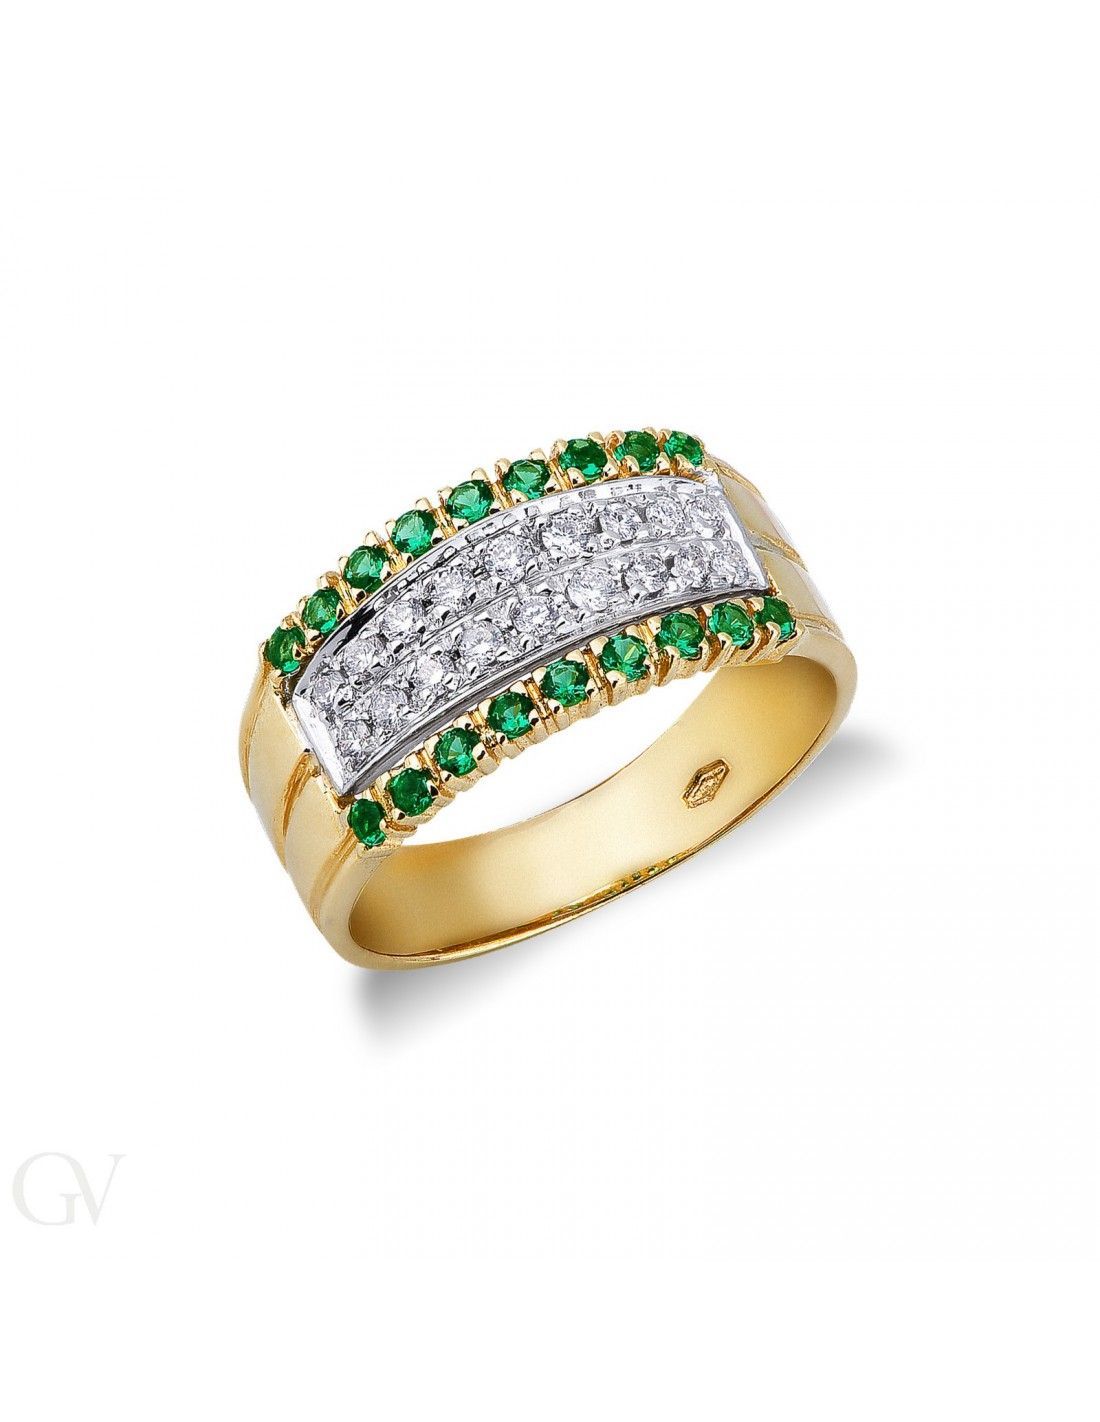 18k Yellow Gold Band Ring With Diamonds And Emeralds Measure 14 Intended For Gold Band Rings With Diamonds (View 7 of 25)